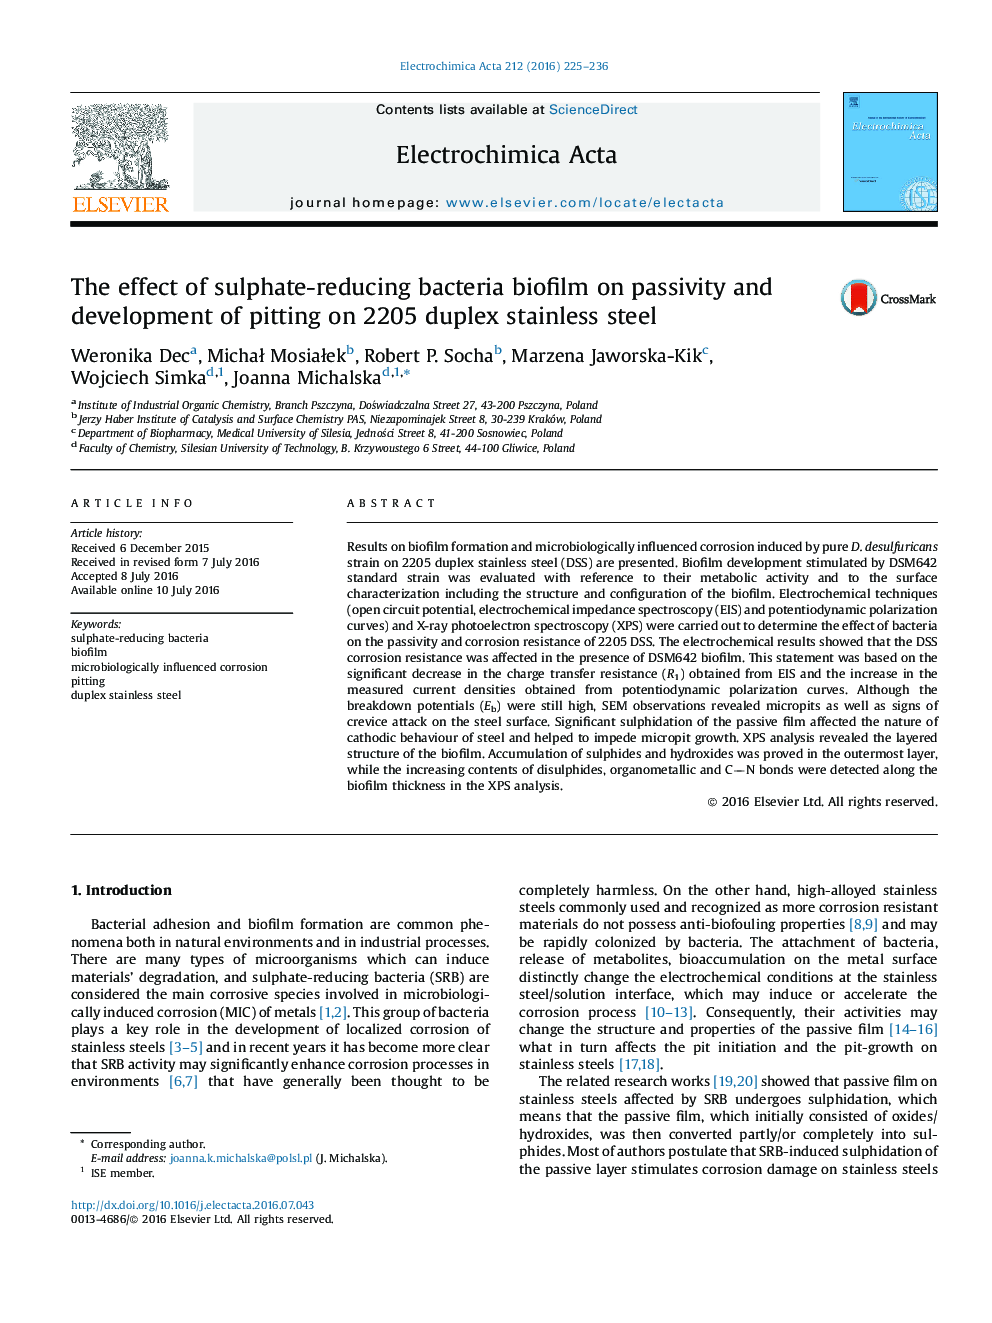 The effect of sulphate-reducing bacteria biofilm on passivity and development of pitting on 2205 duplex stainless steel